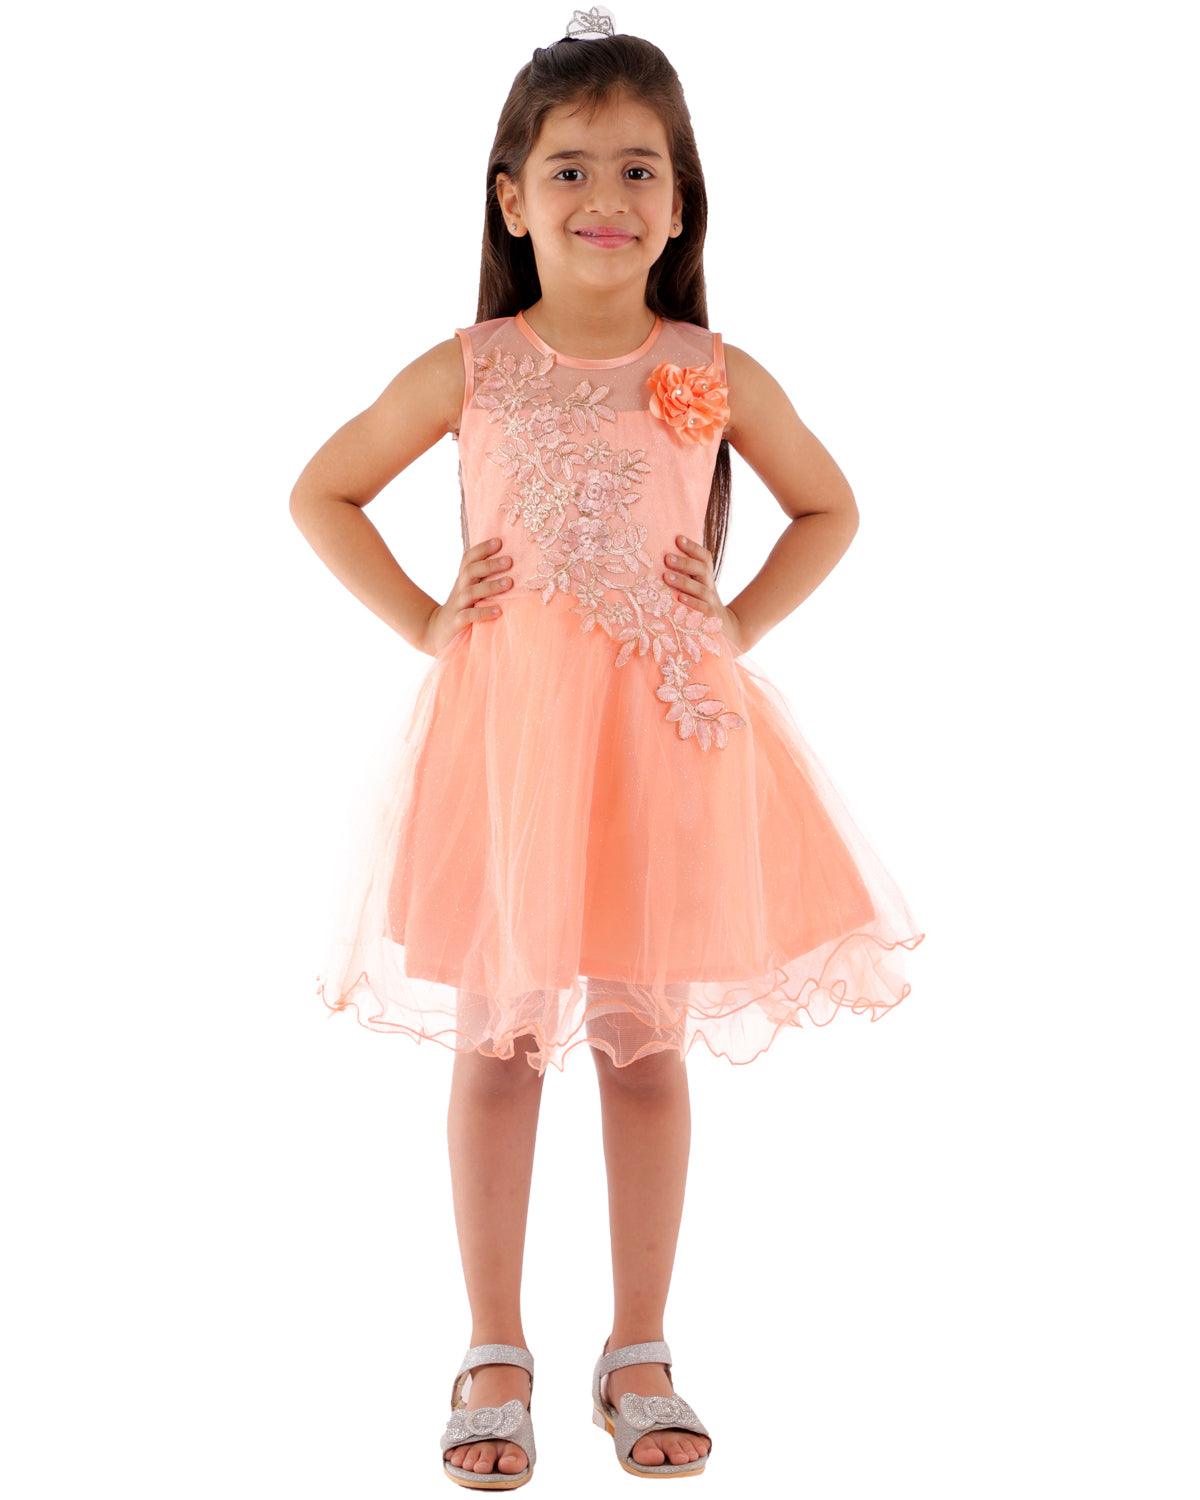 Buy PARILIFESTYLE Angel Pari Dress Frock Party Festival and Casual use for  Baby Girls (1-2Y) Pink at Amazon.in